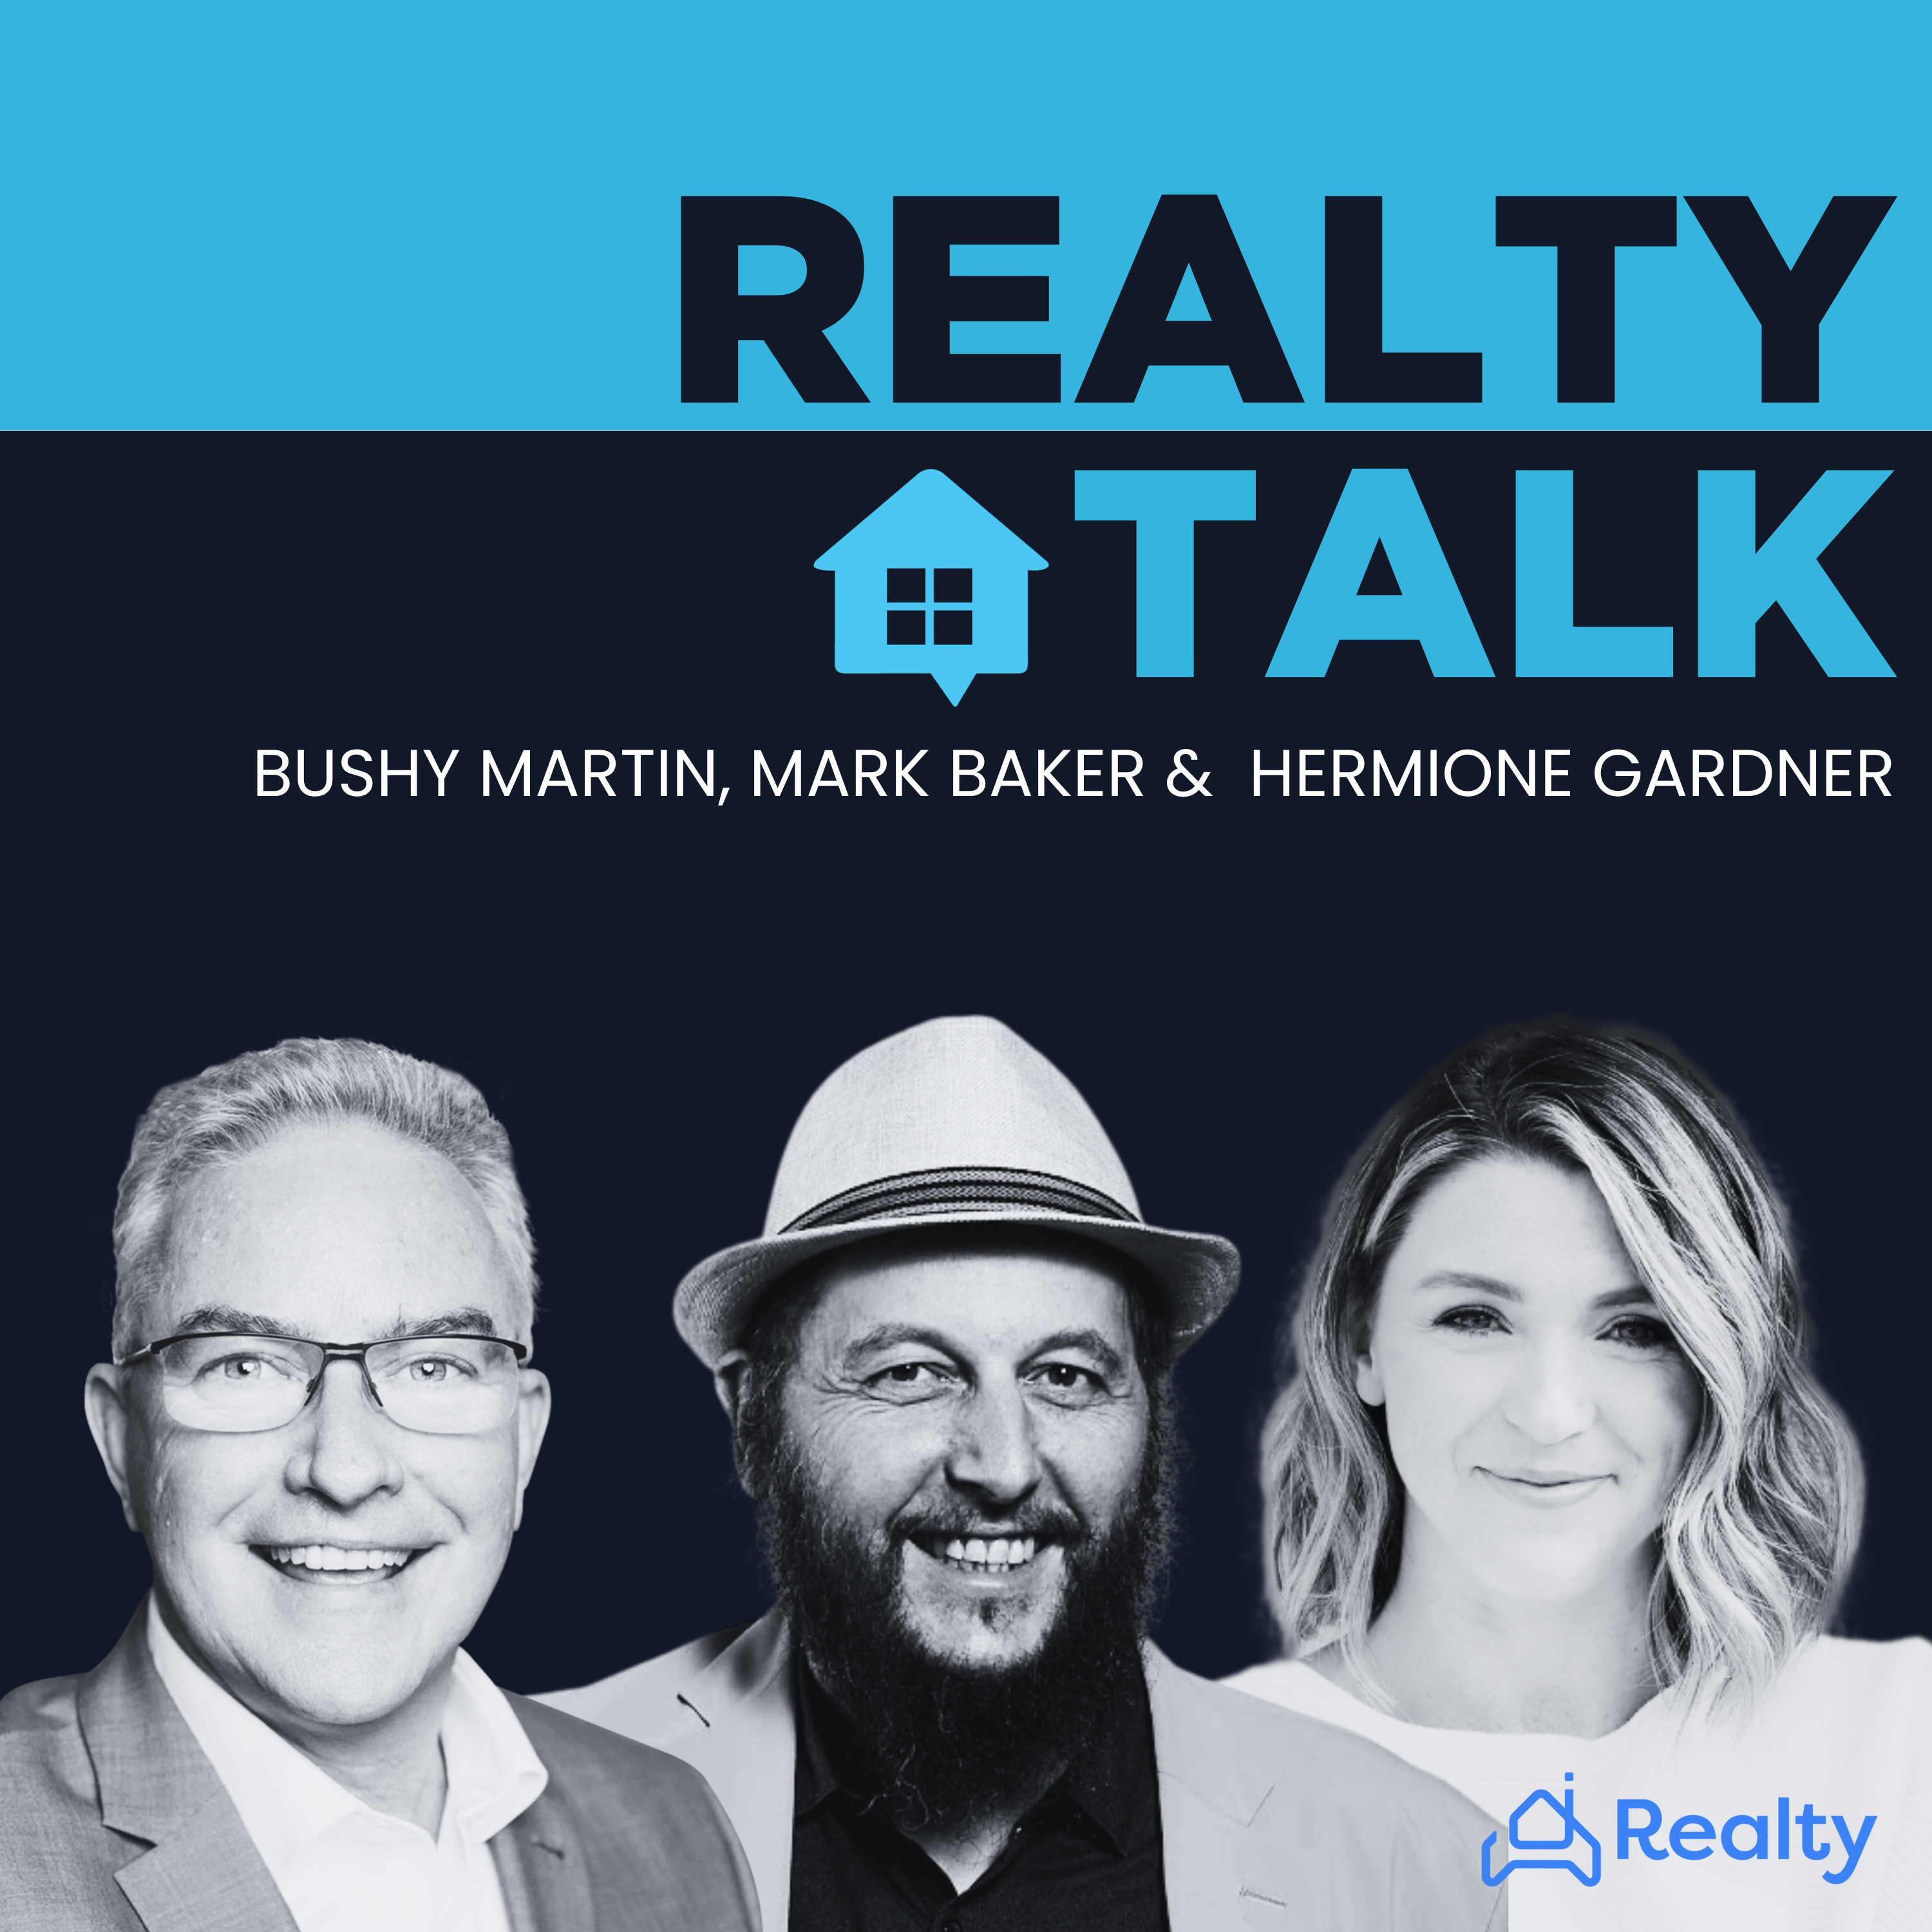 Realty Talk: A simple solution to housing affordability